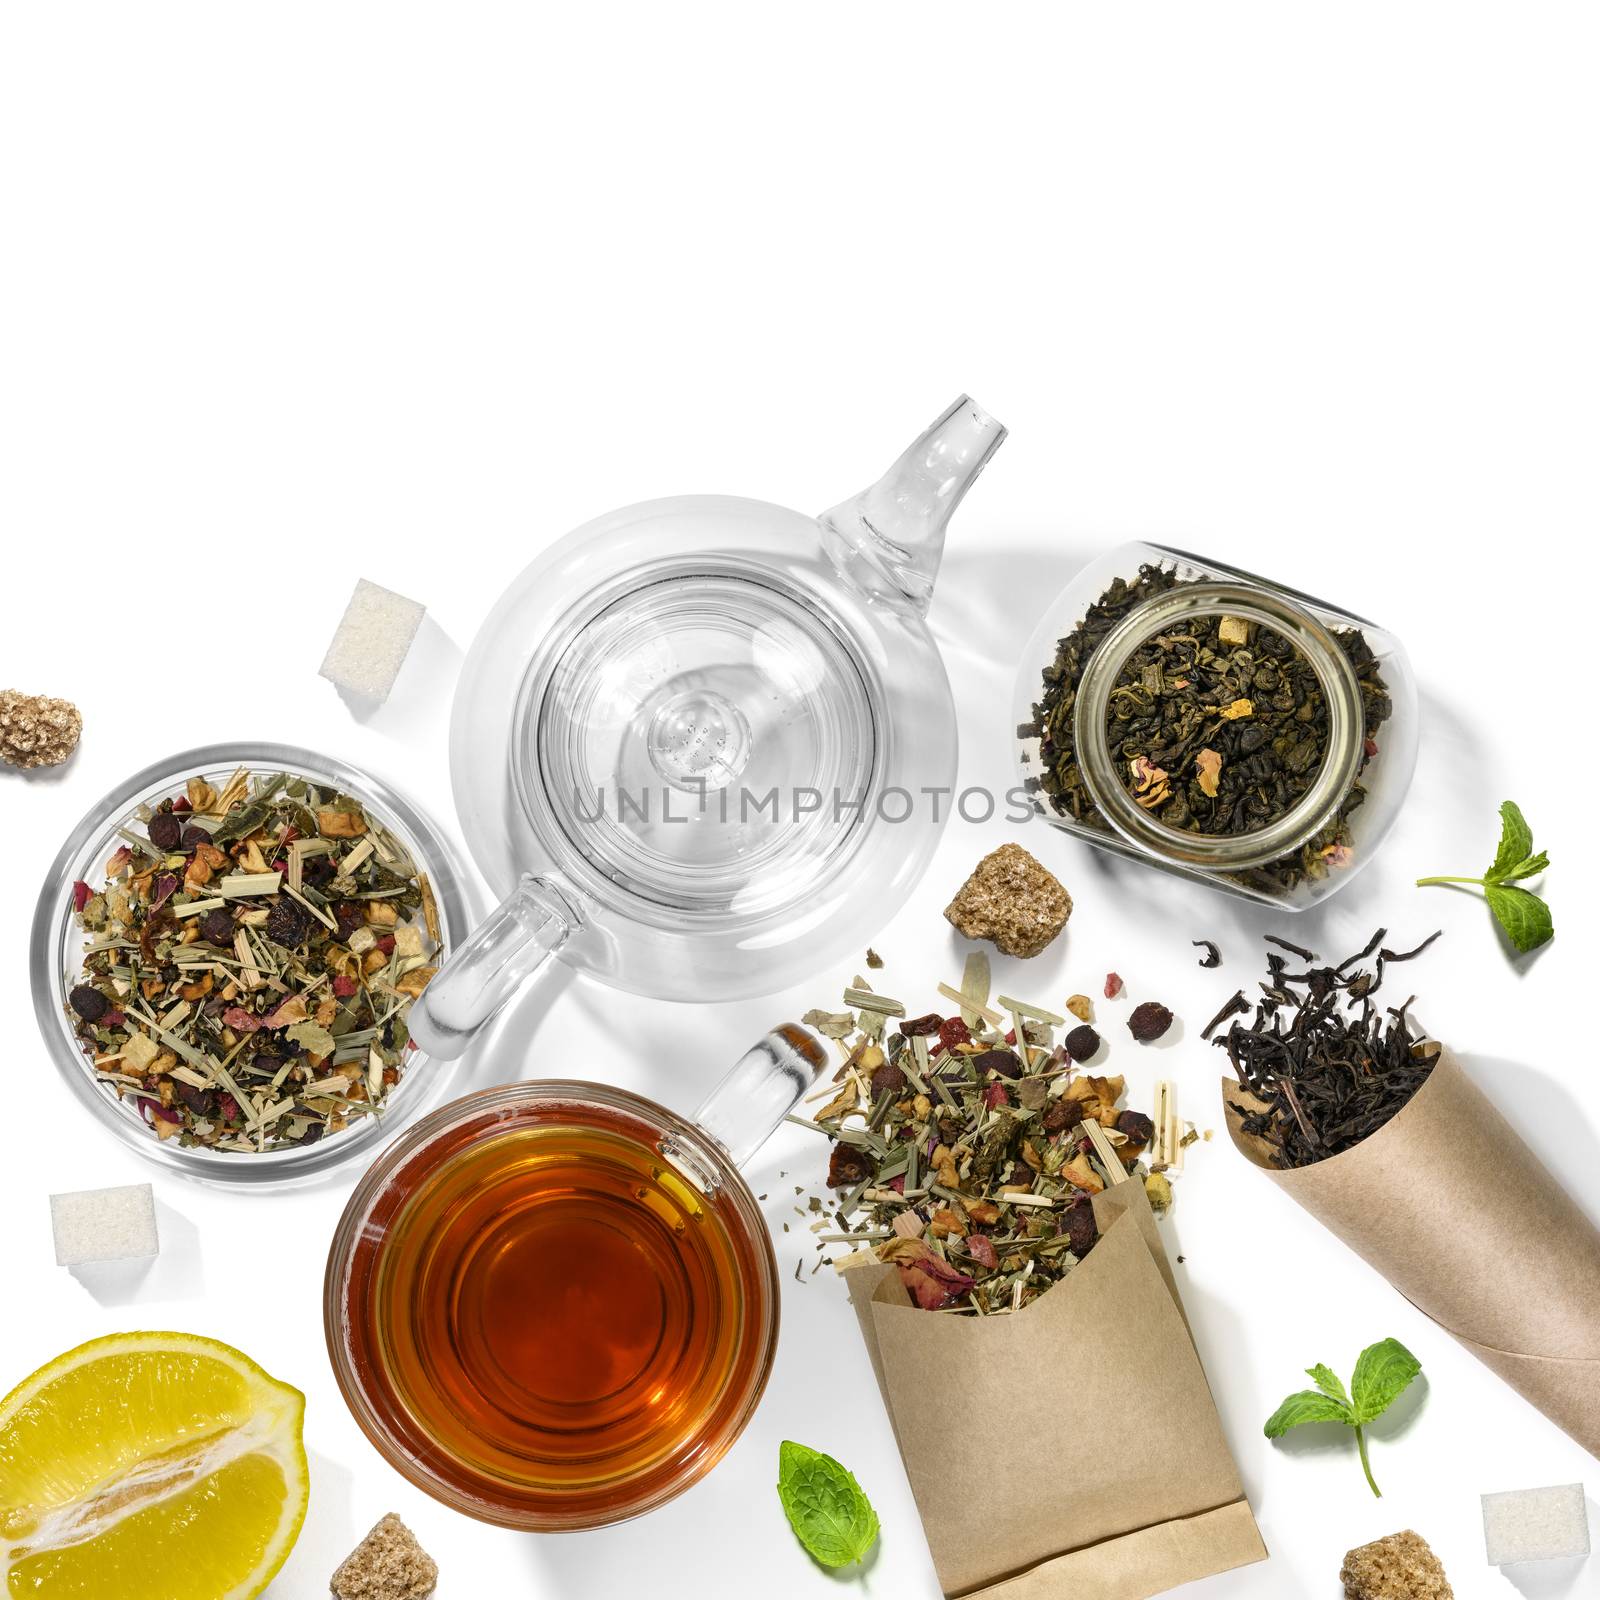 Picking of herbs, berries, tea and accessories. Top view on white background.